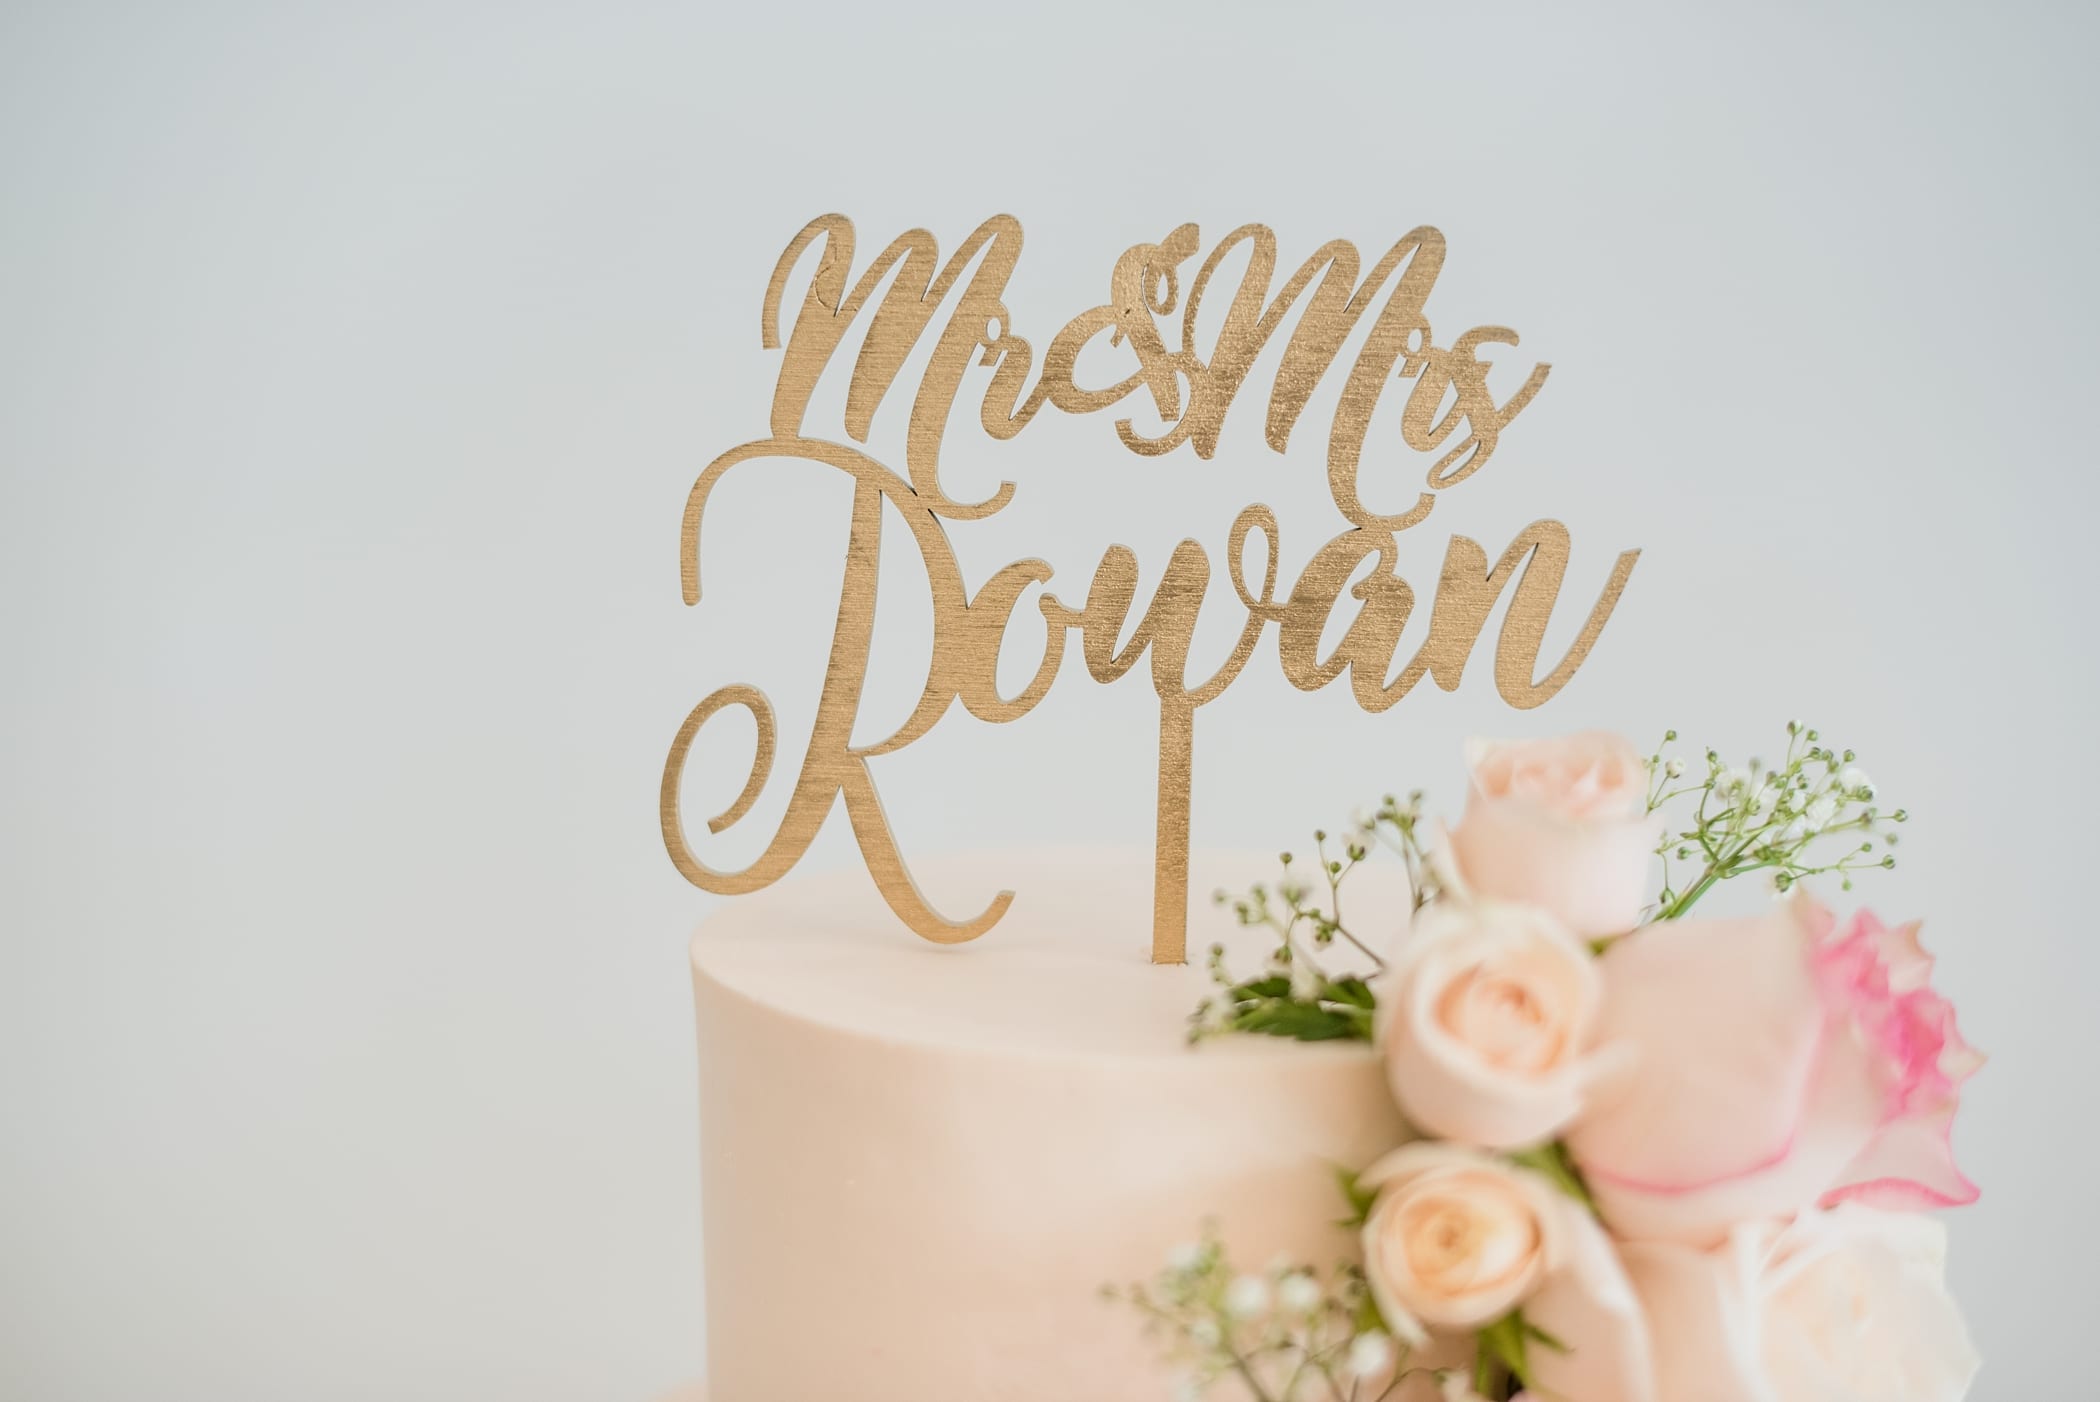 Simple white wedding cake • Blush and White Florals • Cake topper | Michelle & Logan Photo+Films